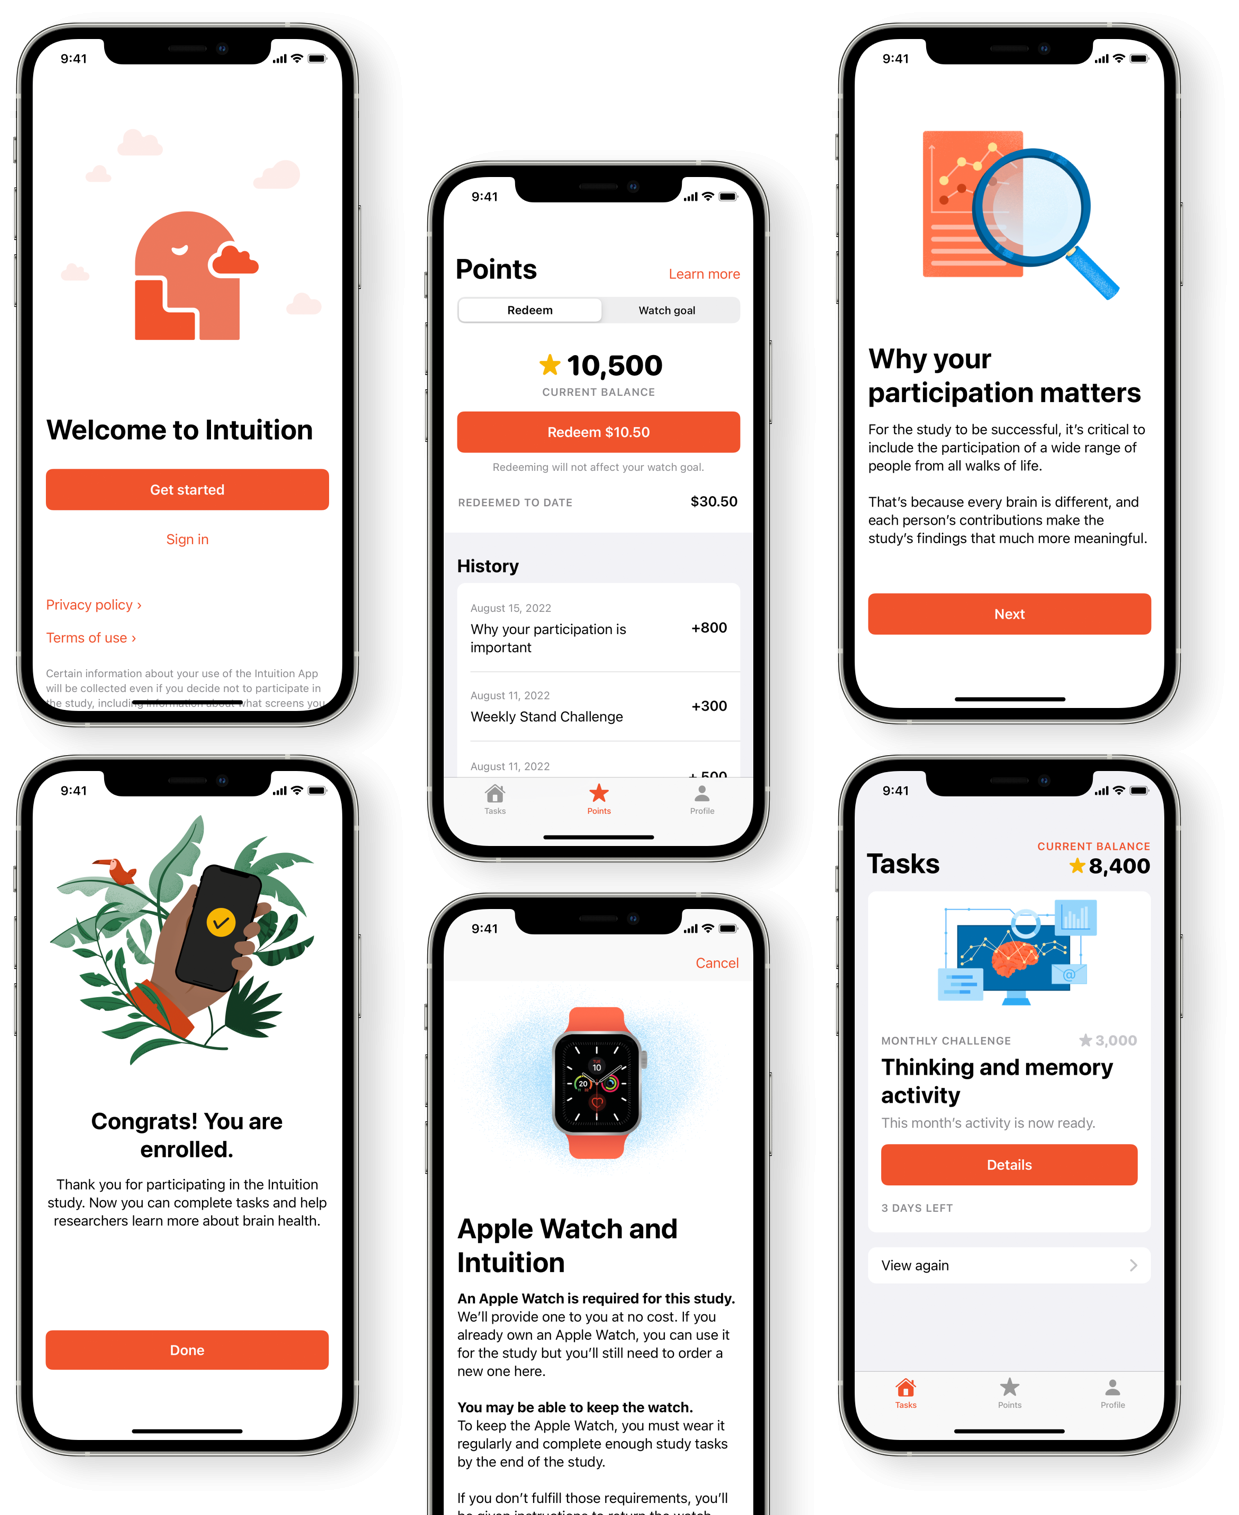 FREE Apple Watch SE and $260 in Gift Cards from Brain Health Study